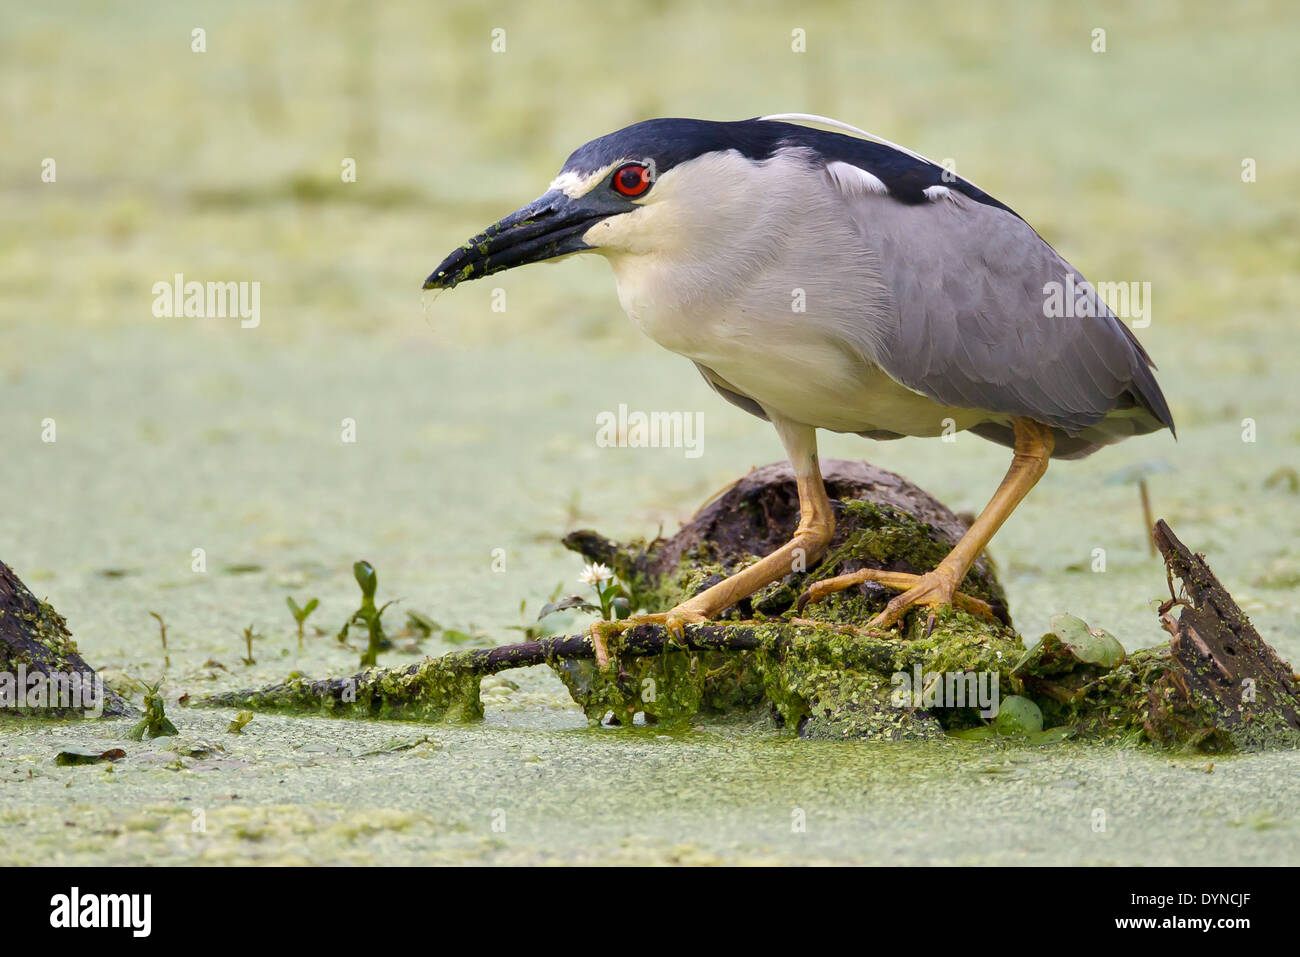 Bihoreau gris - Nycticorax nycticorax - adulte Banque D'Images